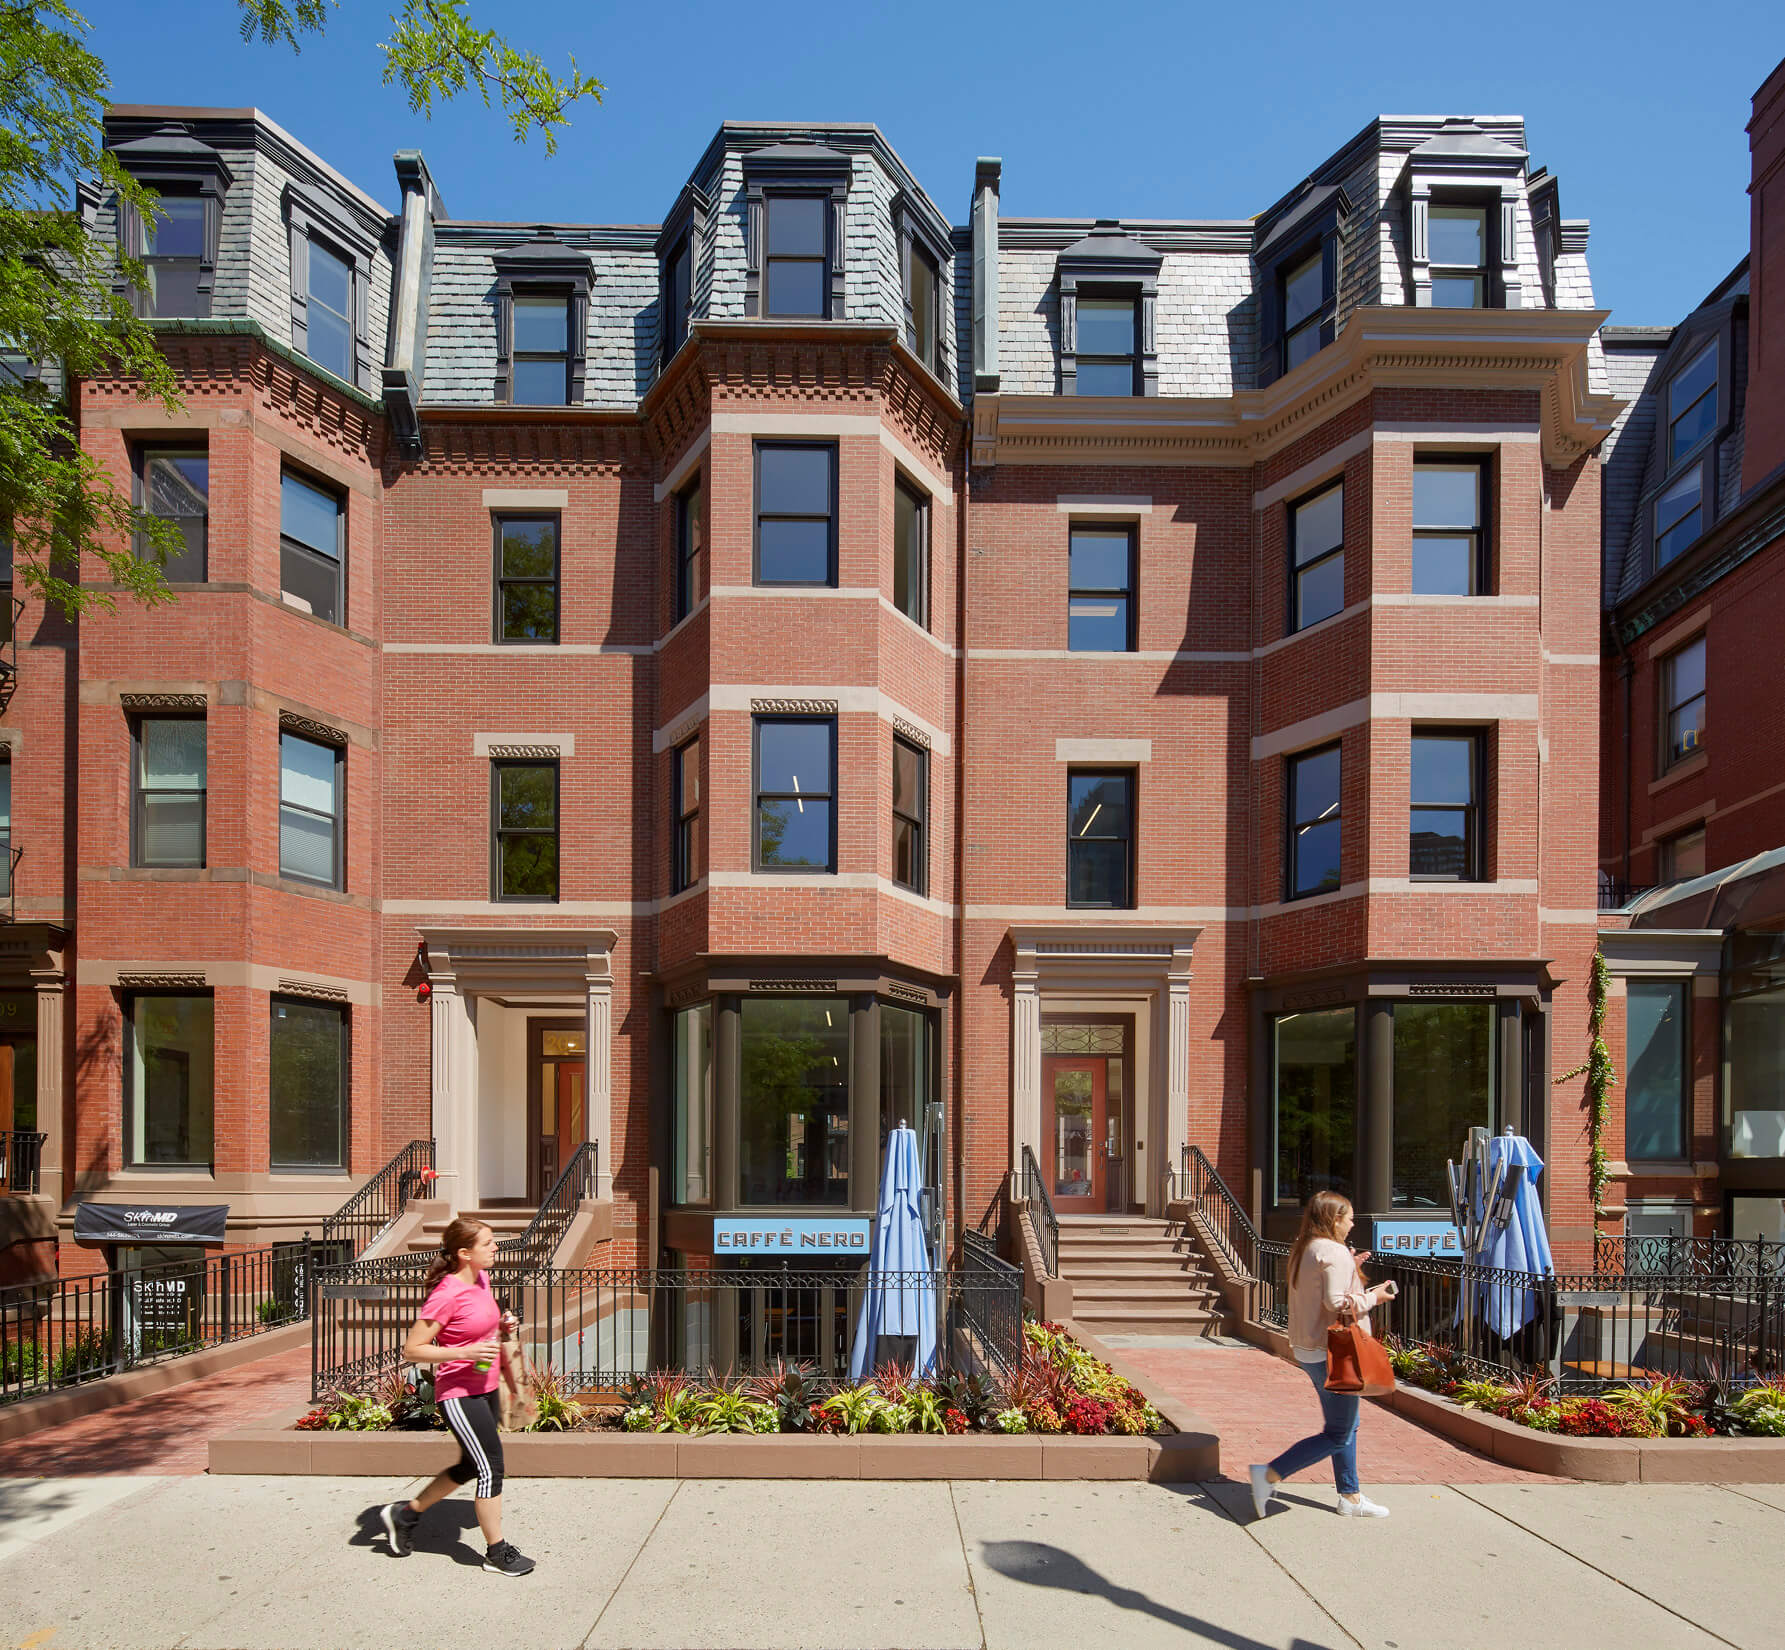 Mixed Use Brownstone Combination